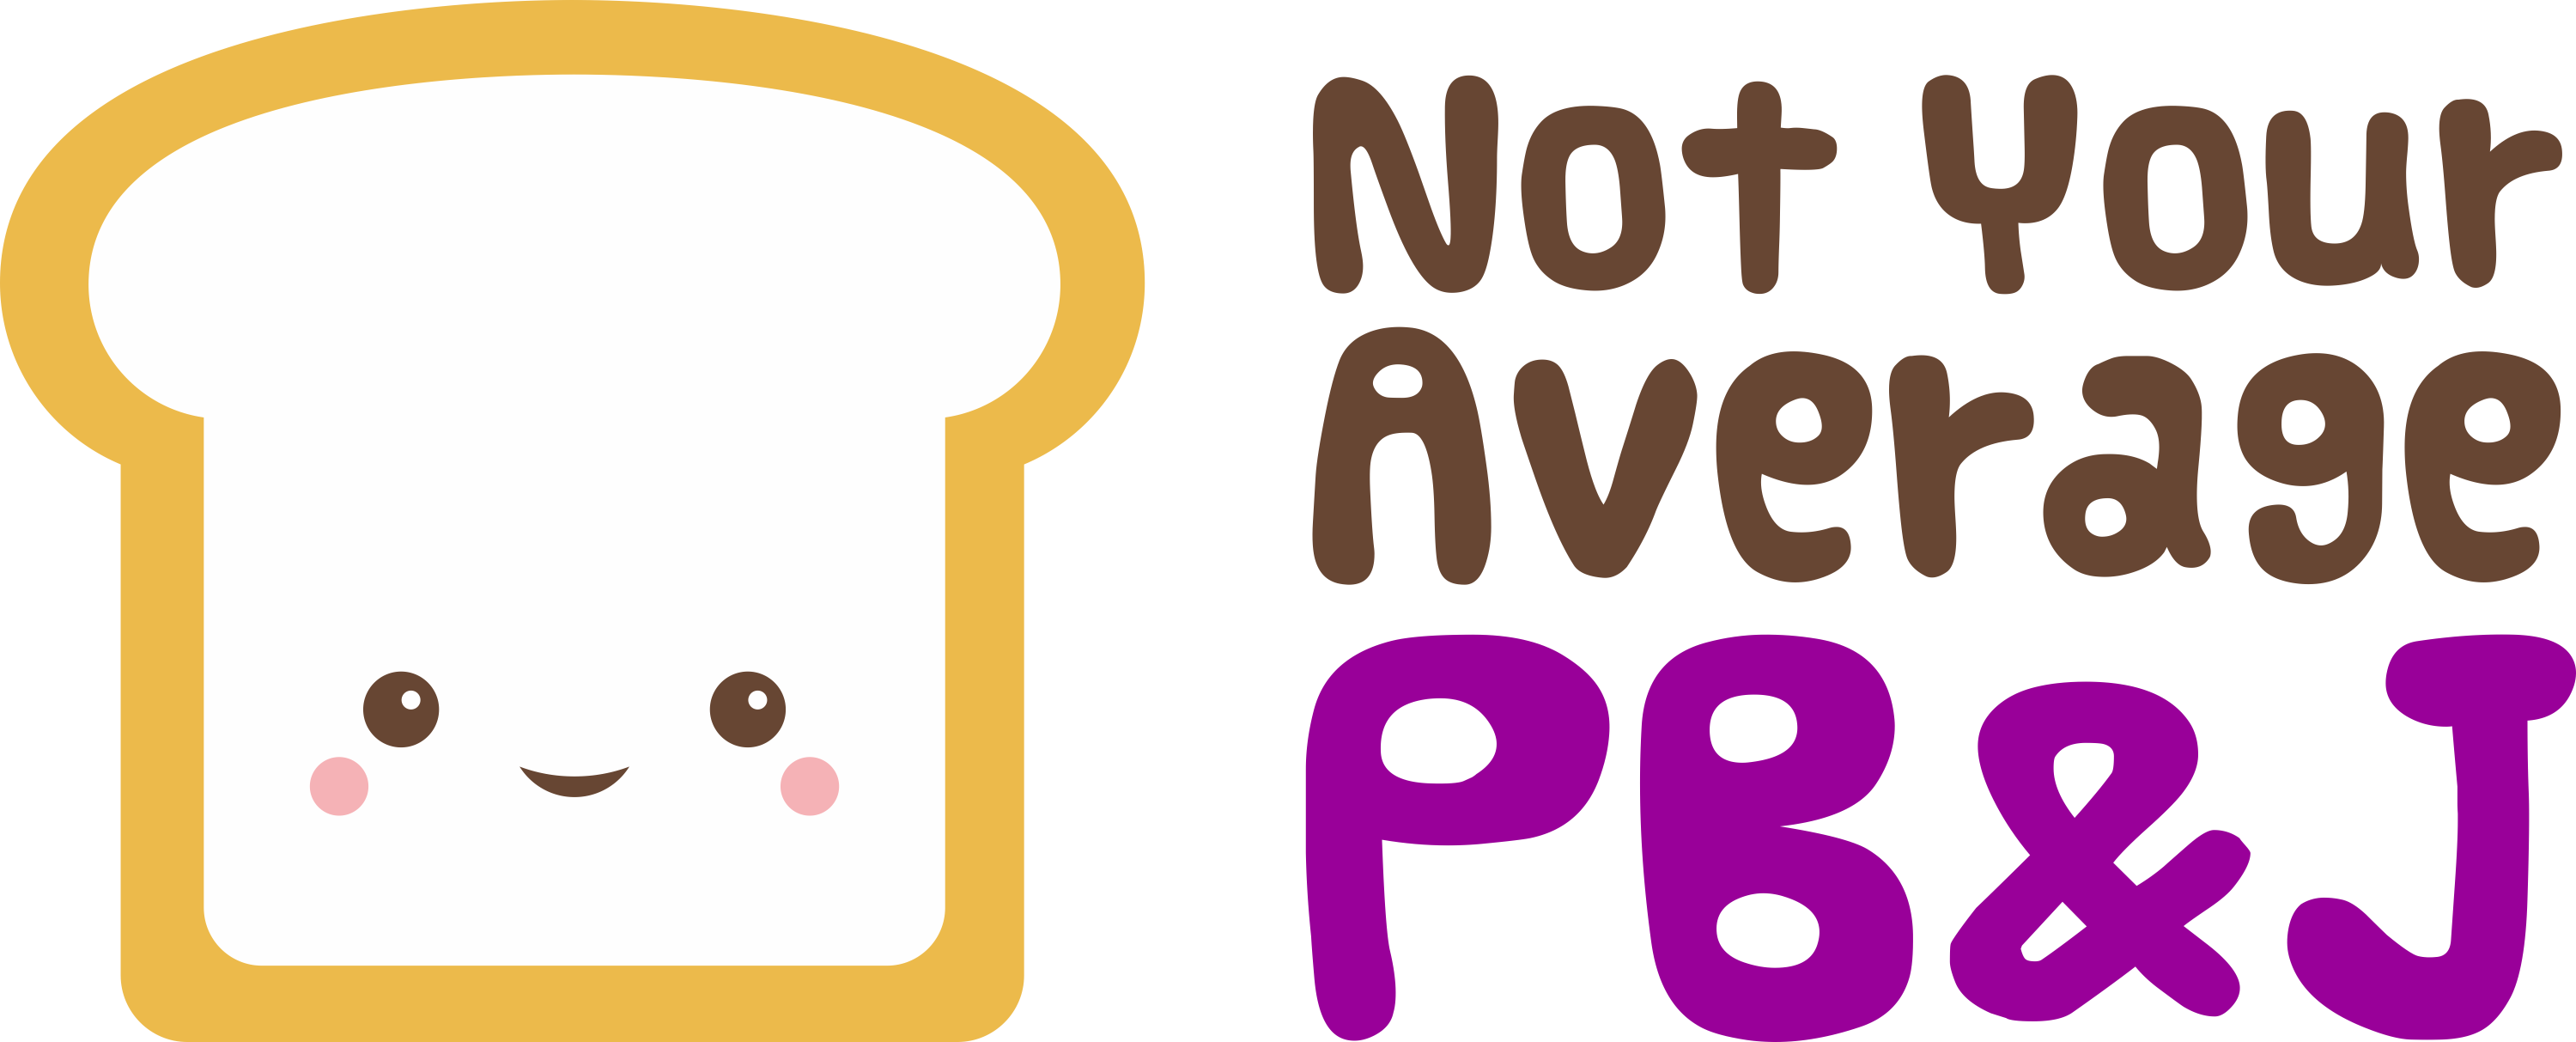 N Y A P B J - Peanut Butter And Jelly Sandwich (3000x1213)